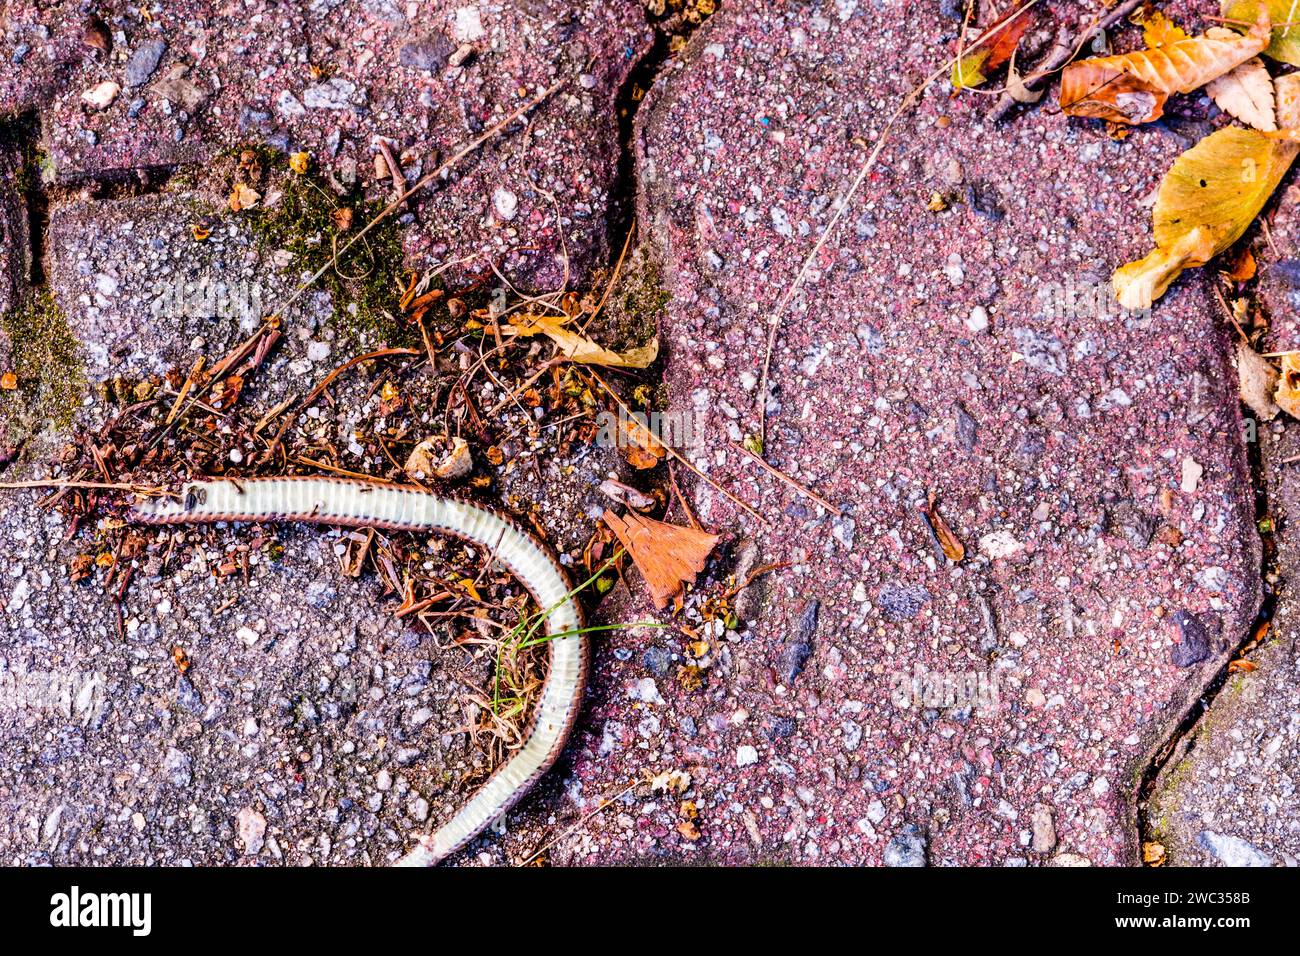 Carcass of dead snake laying on brick sidewalk Stock Photo